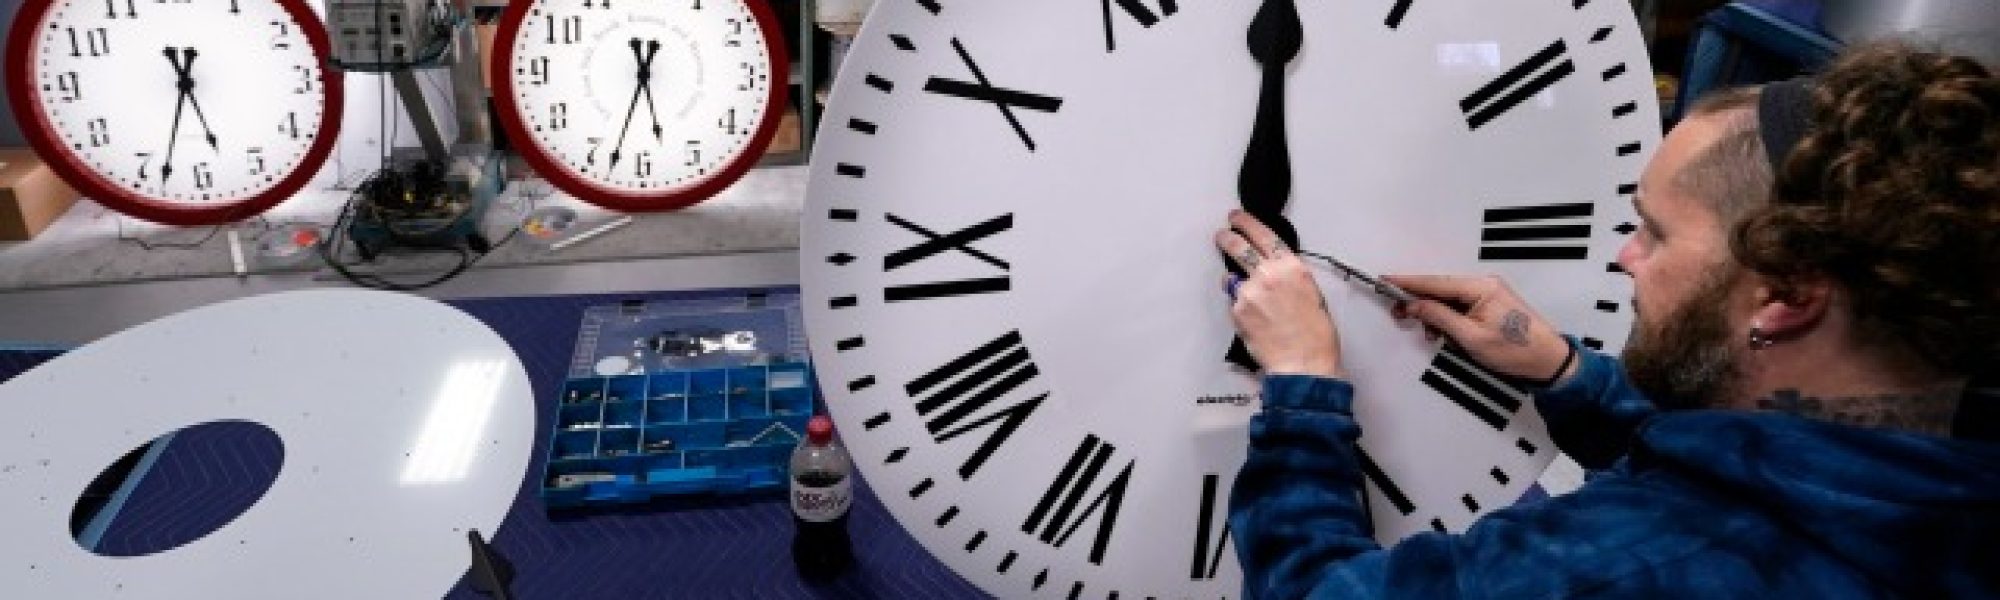 These states could be on daylight saving time permanently if new bill passes